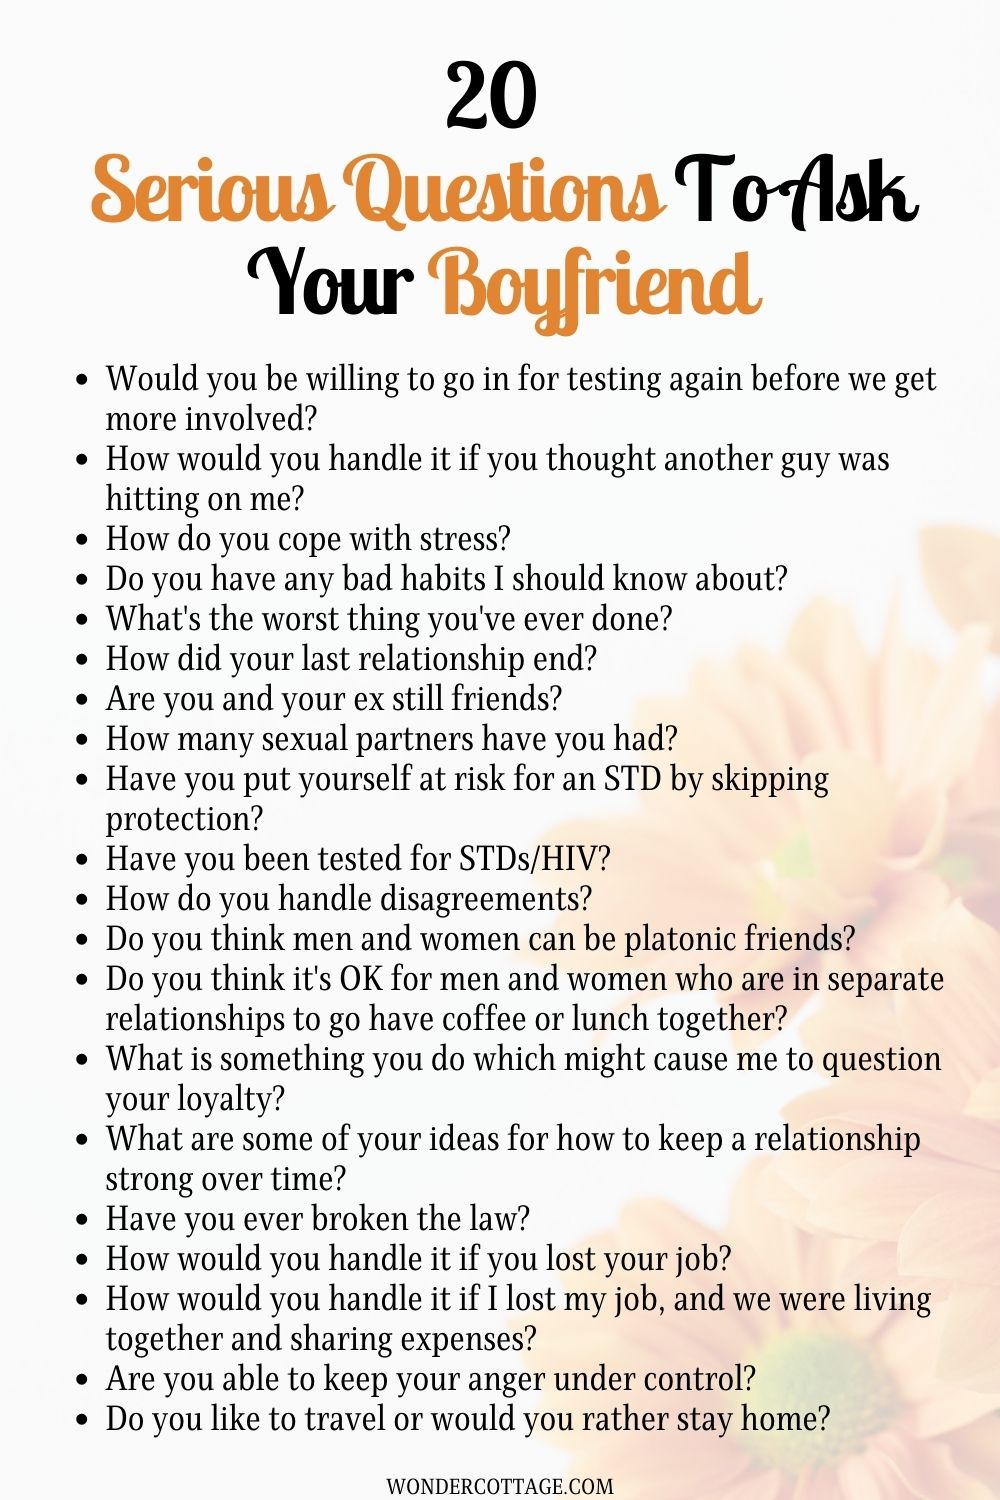 Serious questions to ask your boyfriend